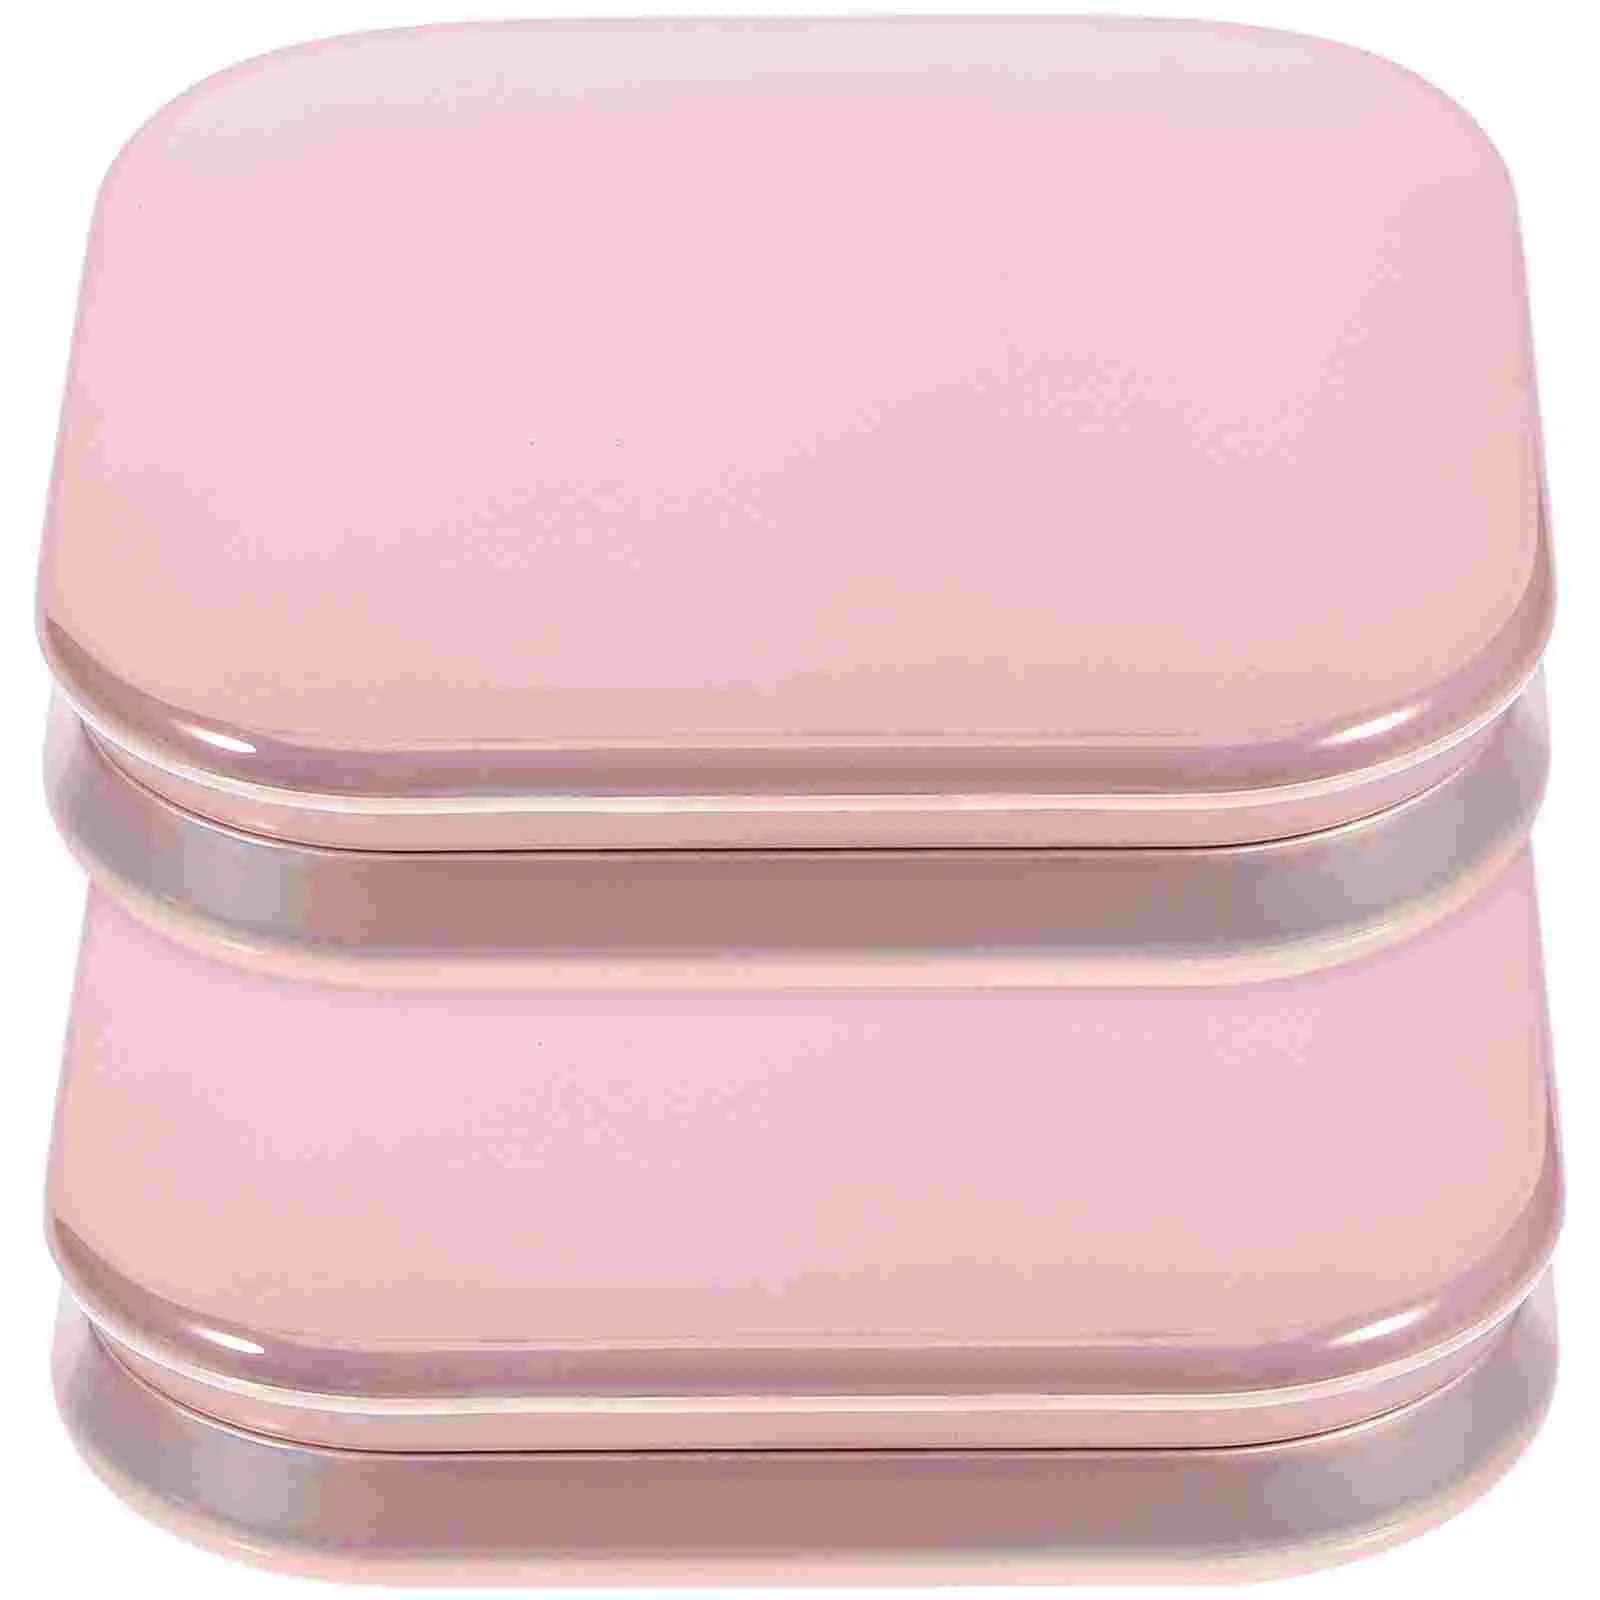 

Empty Eyeshadow Palette Blush Box Portable Cosmetic Makeup Case Container With Mirror For Bb Cream Foundation Powder DIY Box